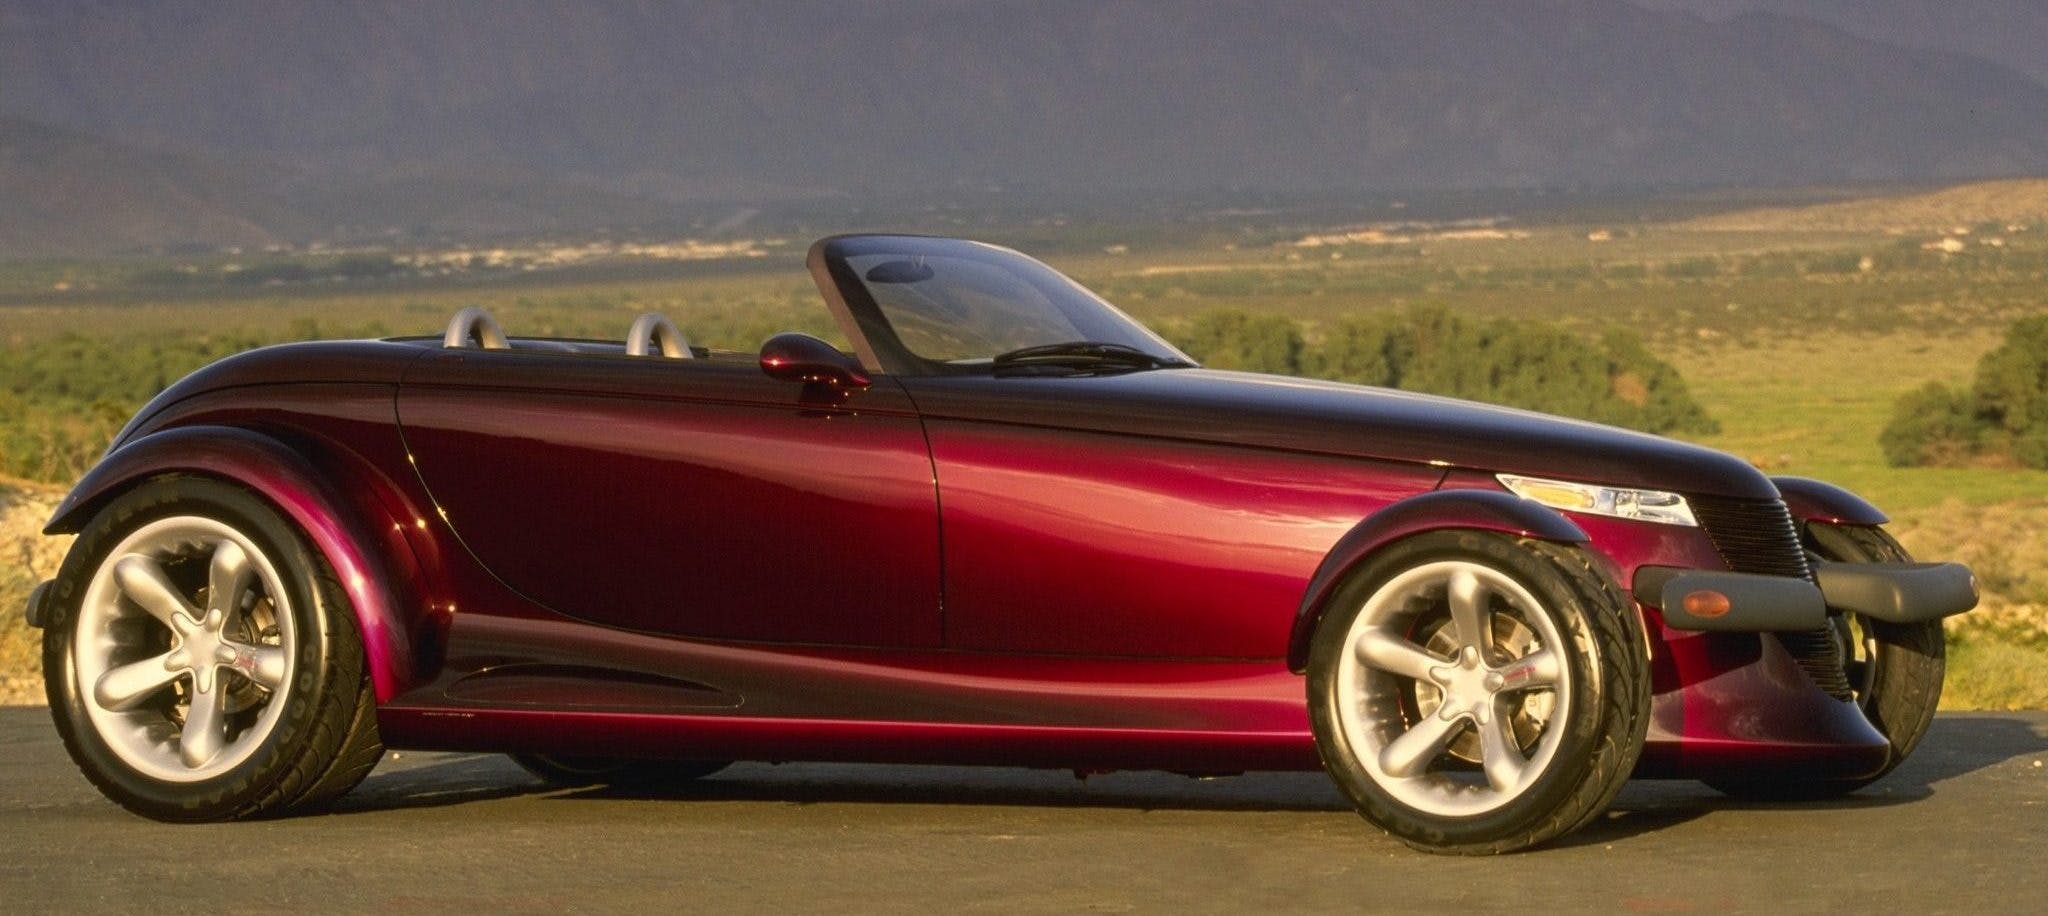 Plymouth Prowler Concept_1